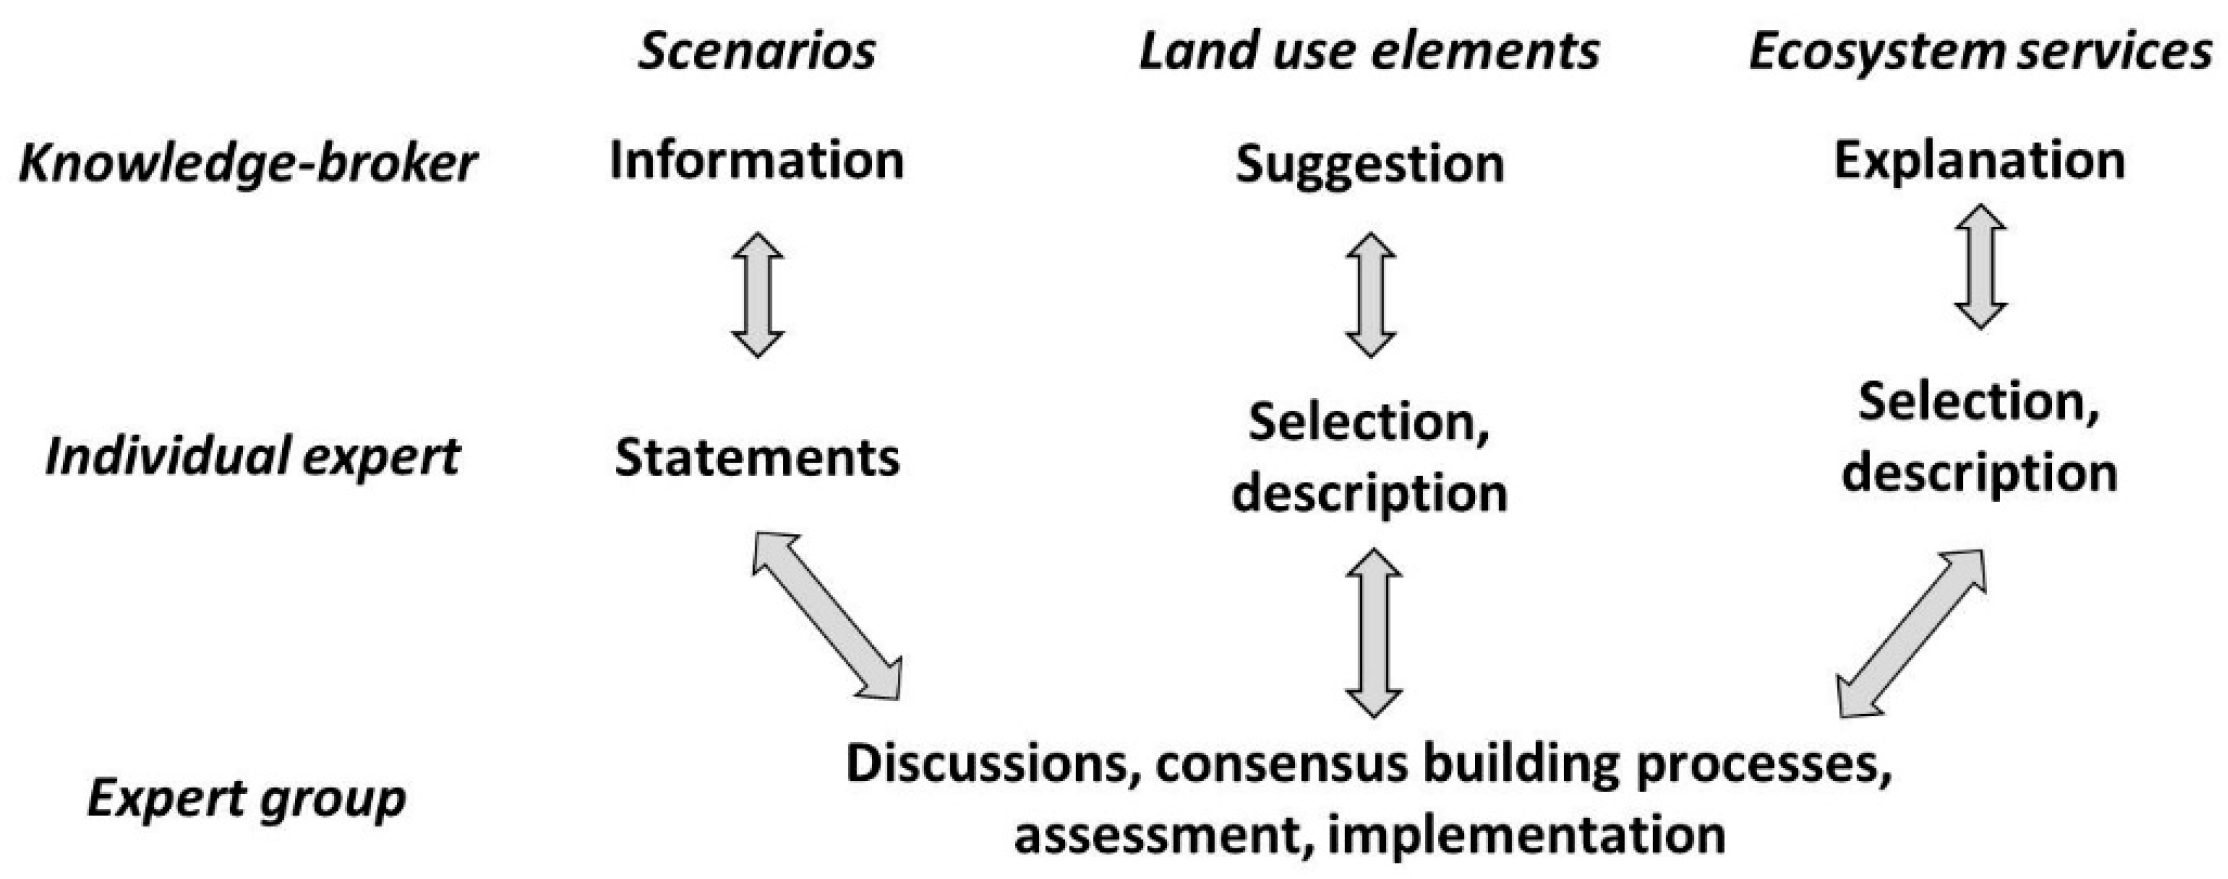 Sustainability | Free Full-Text | Collaborative Landscape Planning: Co- Design of Ecosystem-Based Land Management Scenarios | HTML